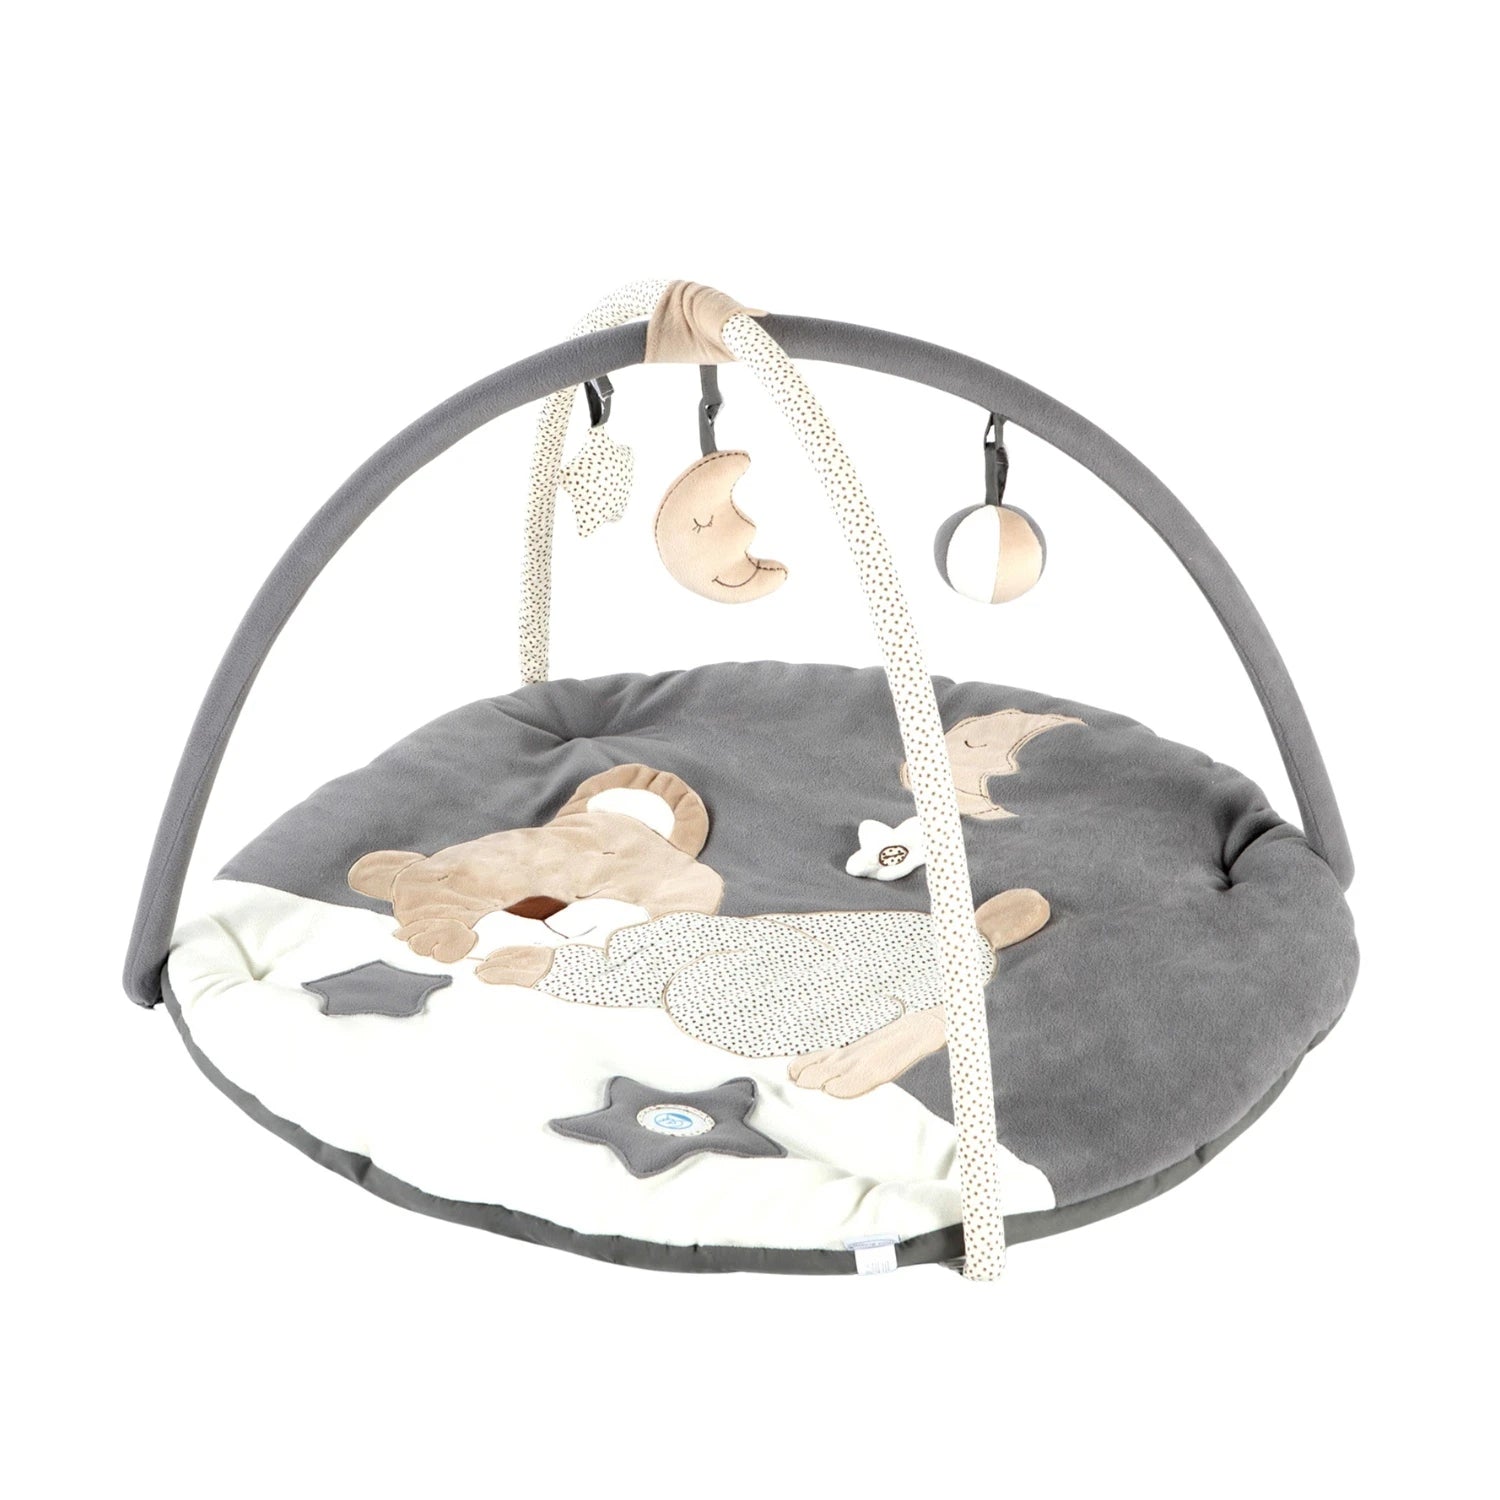 An image of Baby Play Mat - MiniDream Luxury Baby Play Gym - Moon and Star, Super Soft Mater...